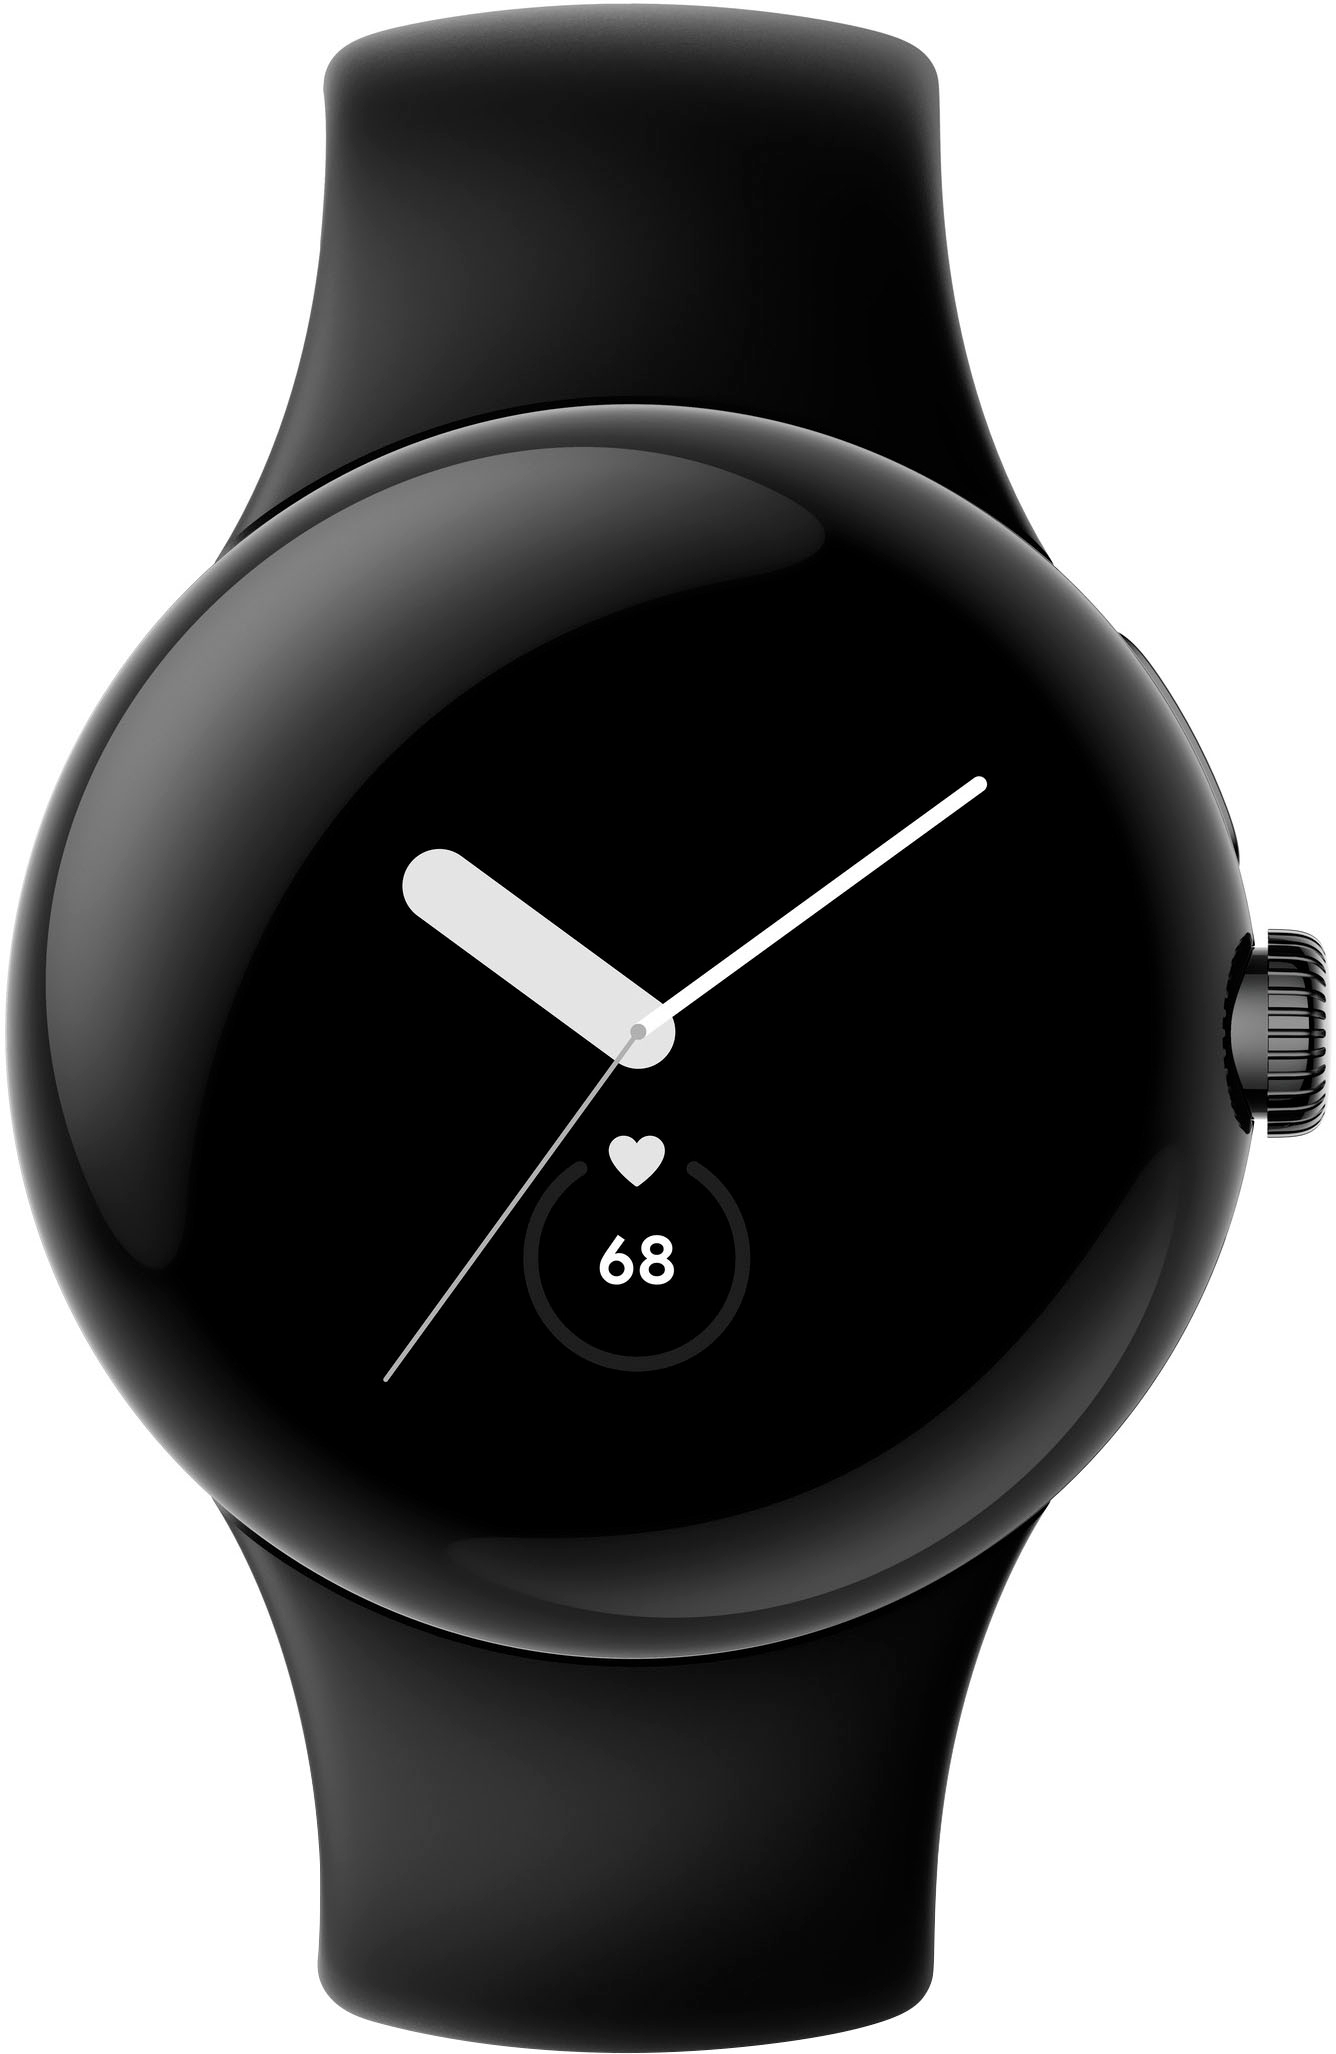 Google Pixel Watch Black Stainless Steel Smartwatch 41mm with